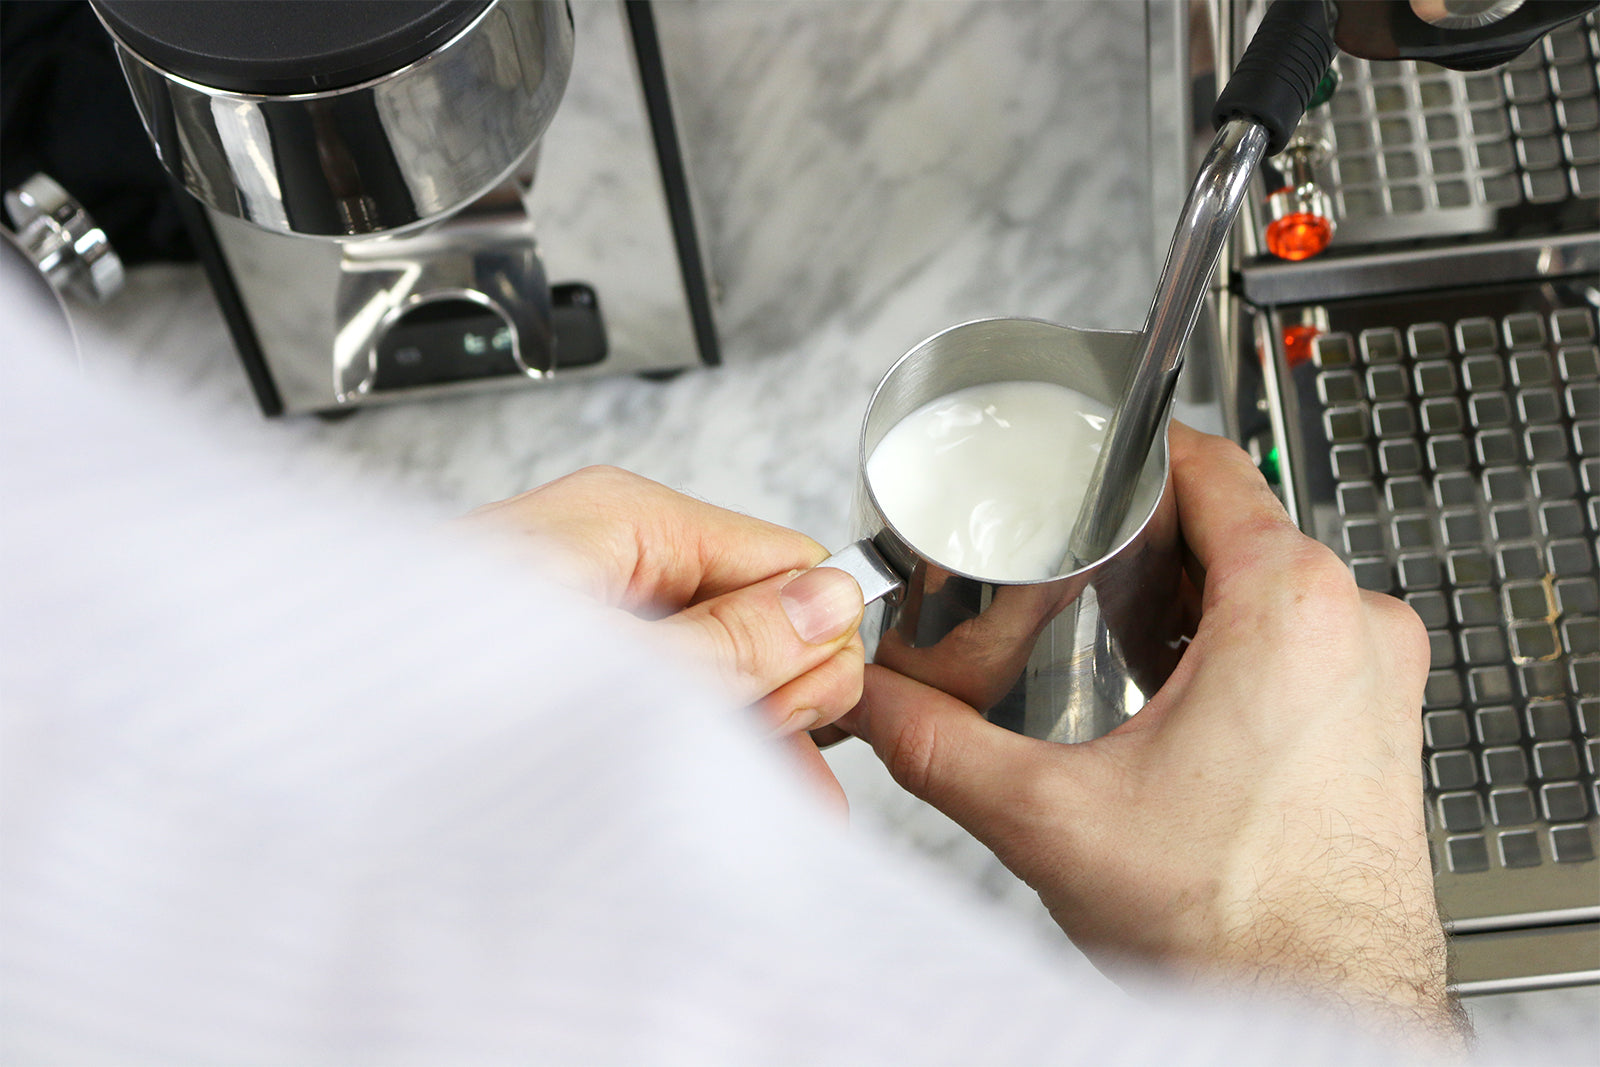 Milk Frother vs Steamer: Know The Exact Differences